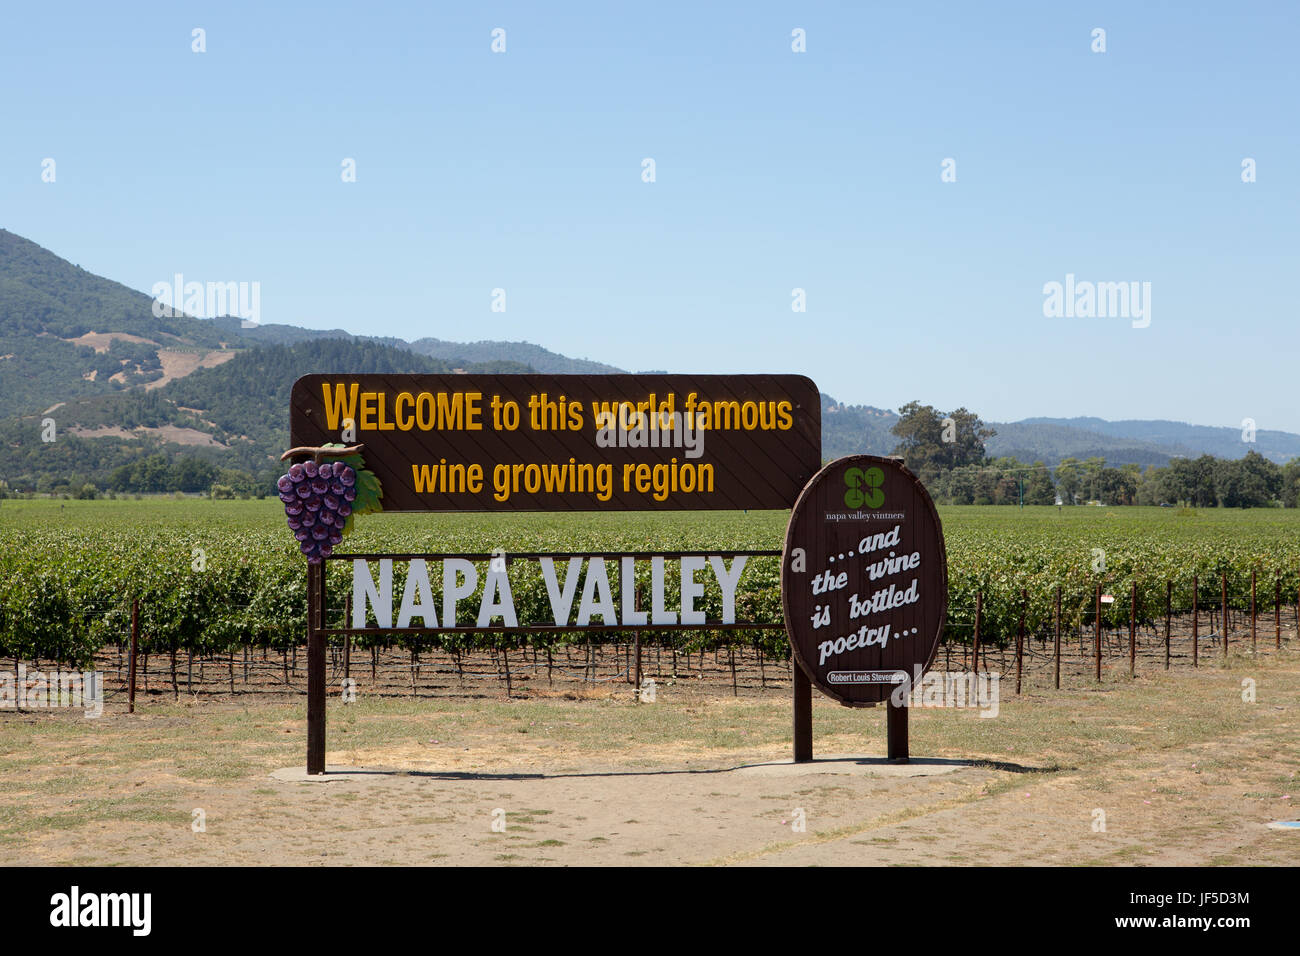 A sign welcoming people to the world famous wine growing region of Napa Valley. Stock Photo